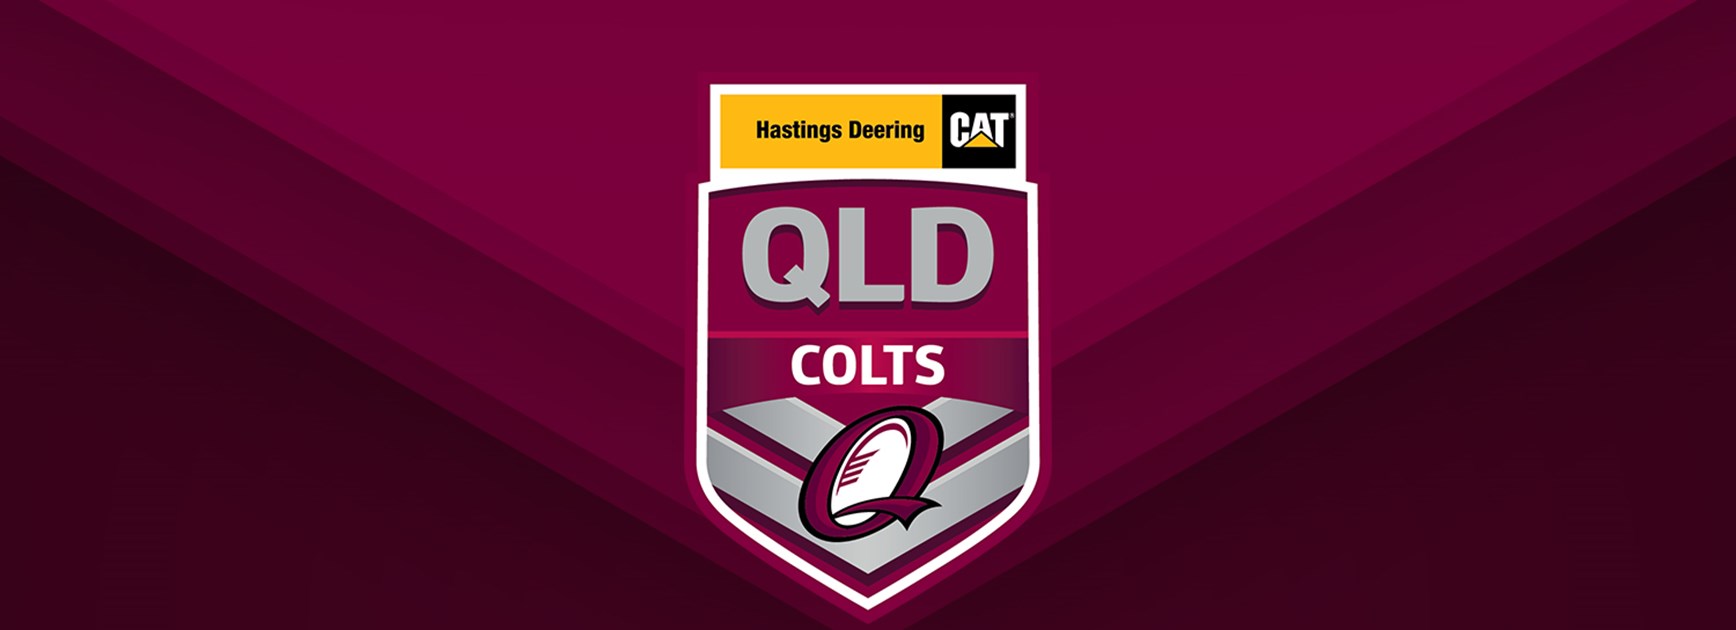 Hastings Deering Colts draw